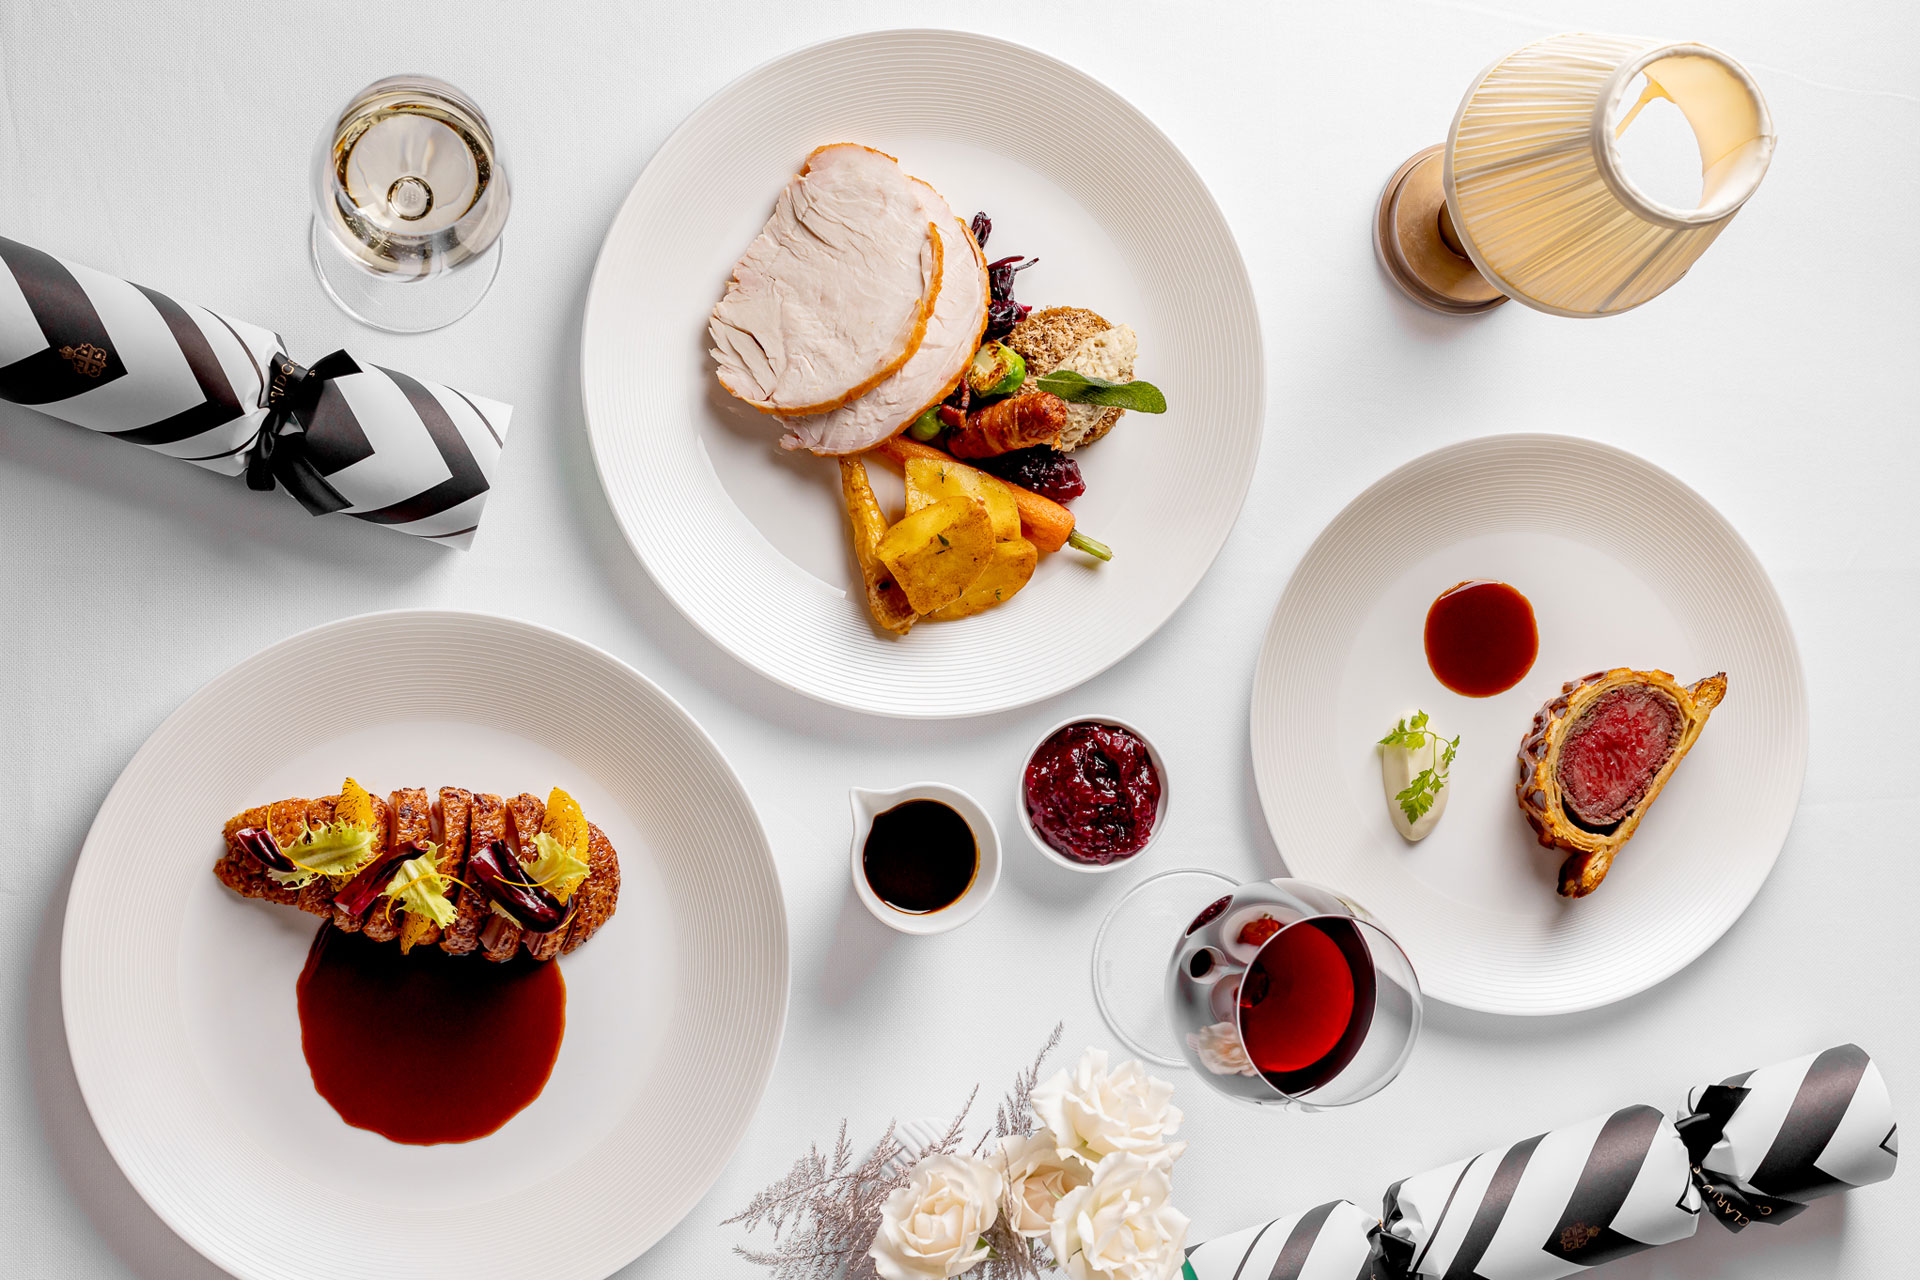 Is This London’s Most Decadent Festive Menu?